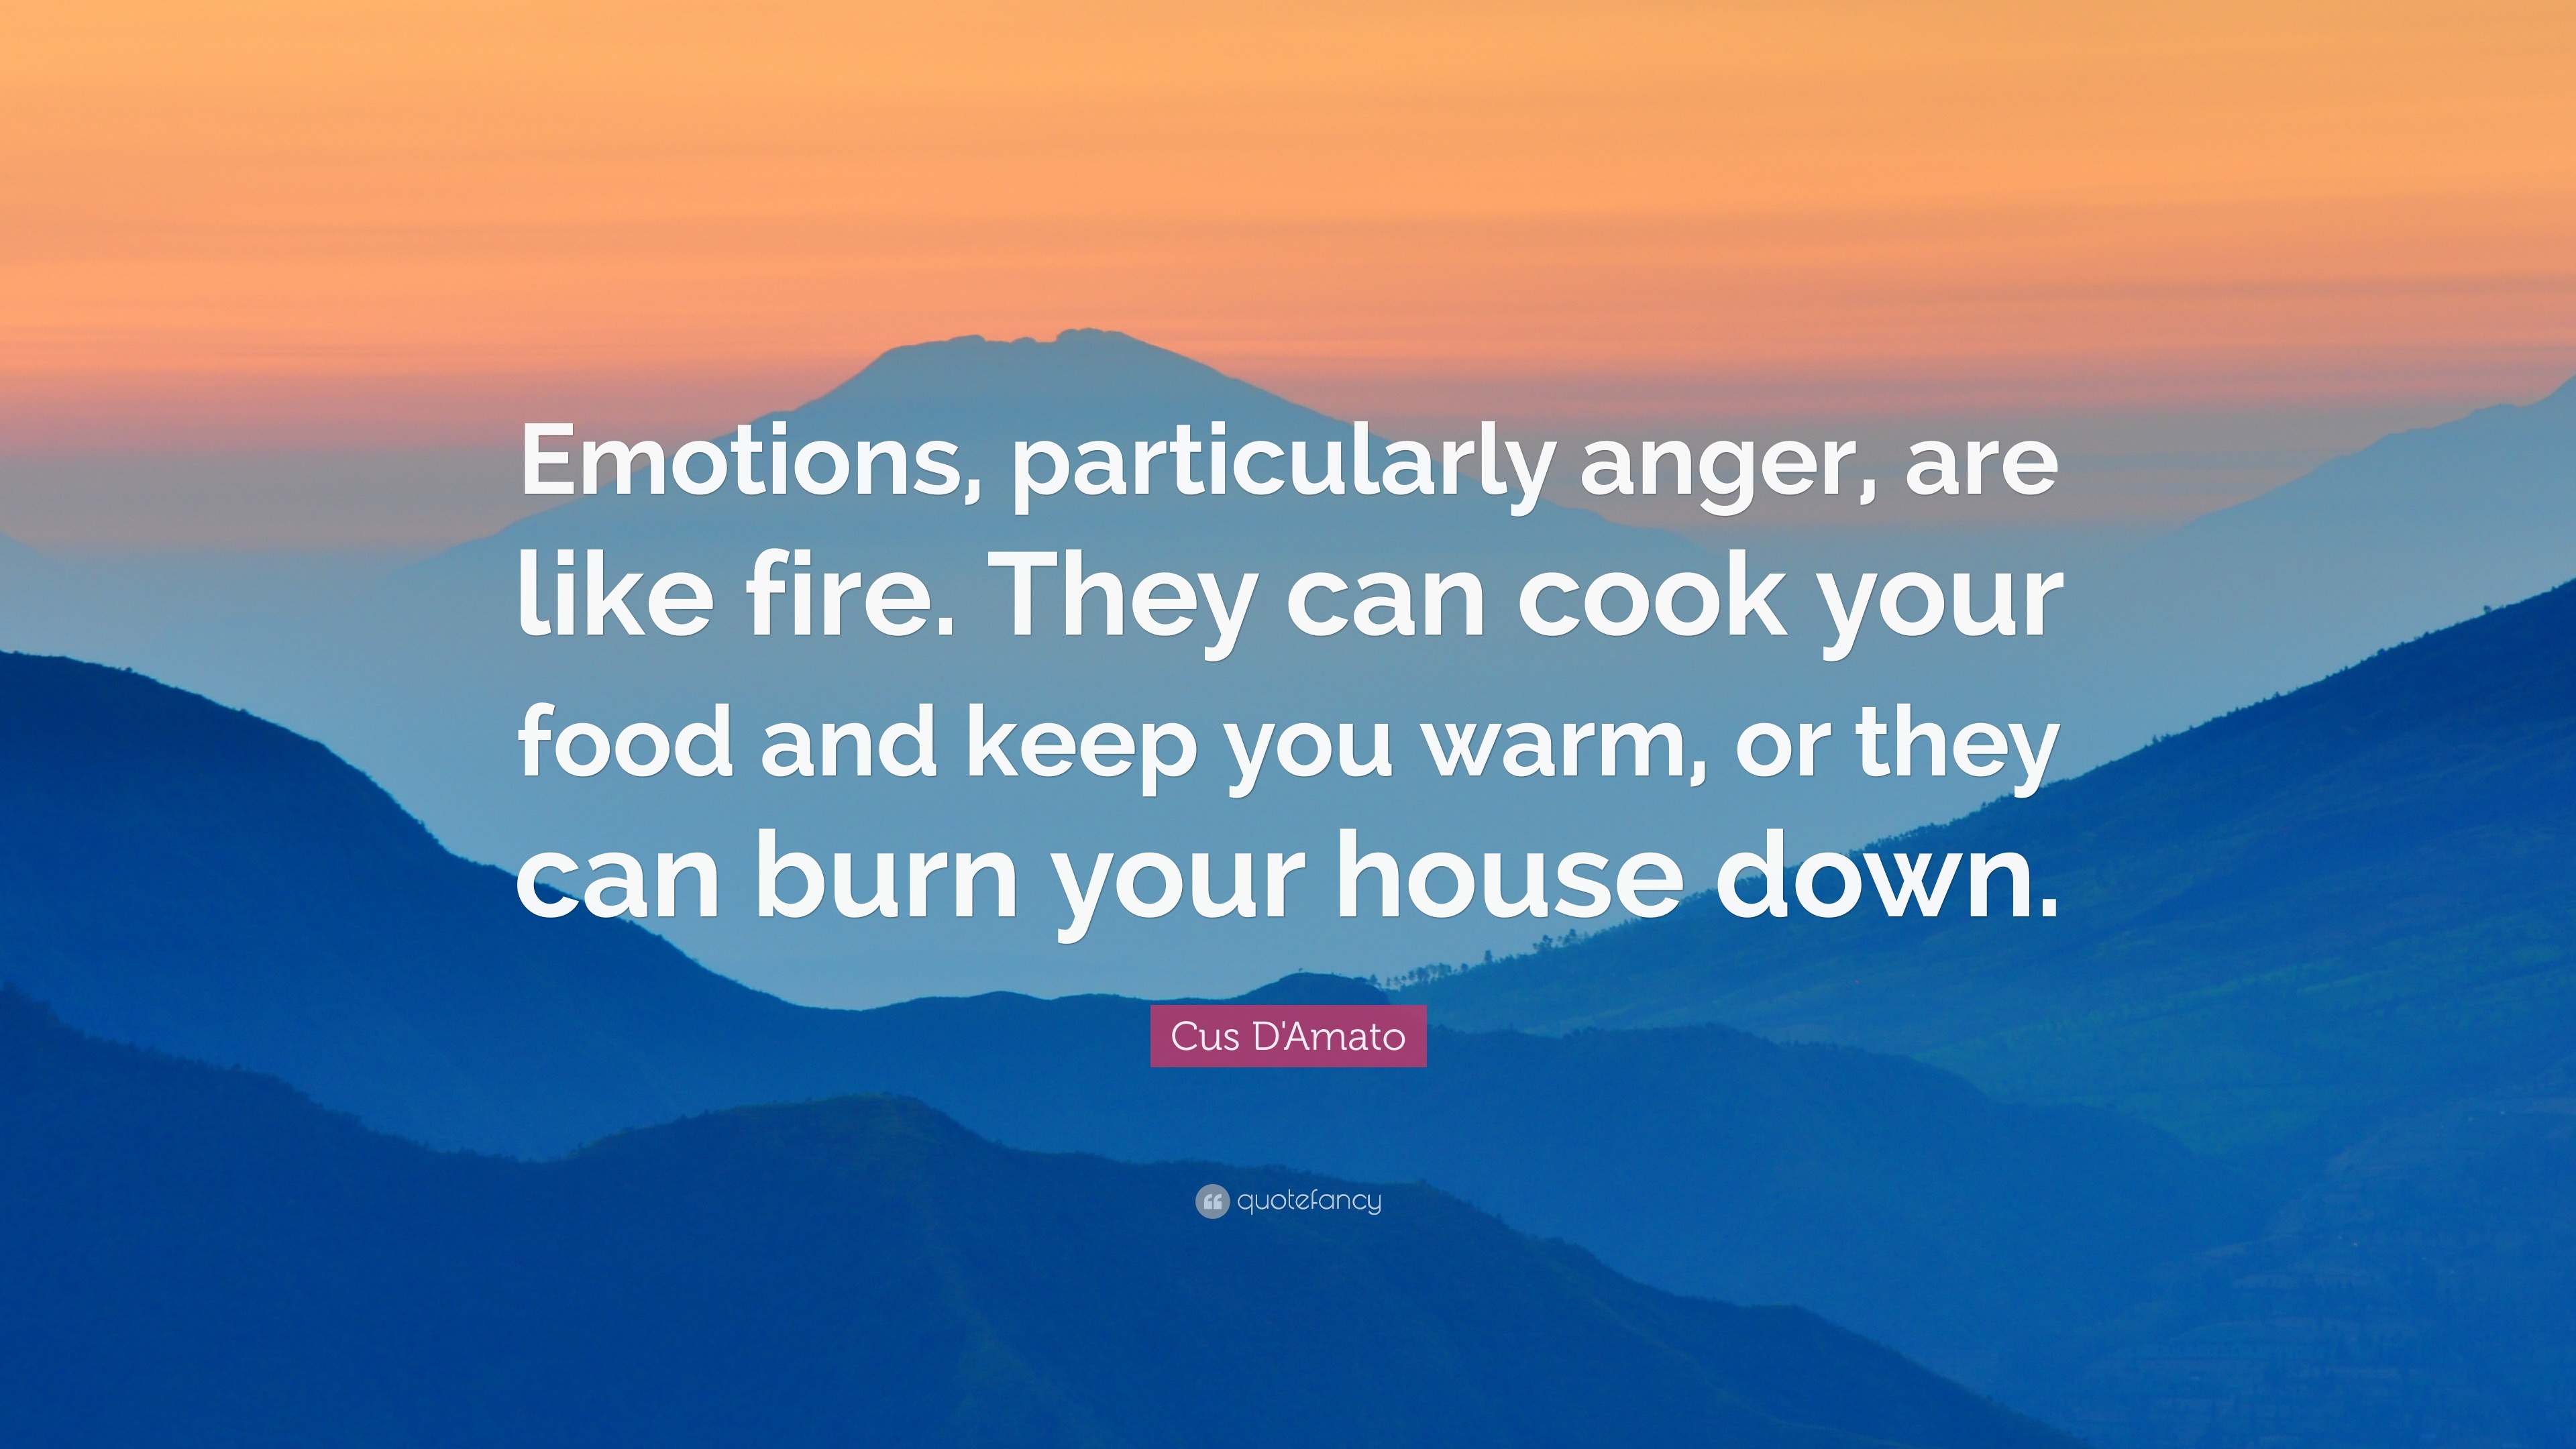 Cus D'Amato Quote: "Emotions, particularly anger, are like fire. They can cook your food and ...